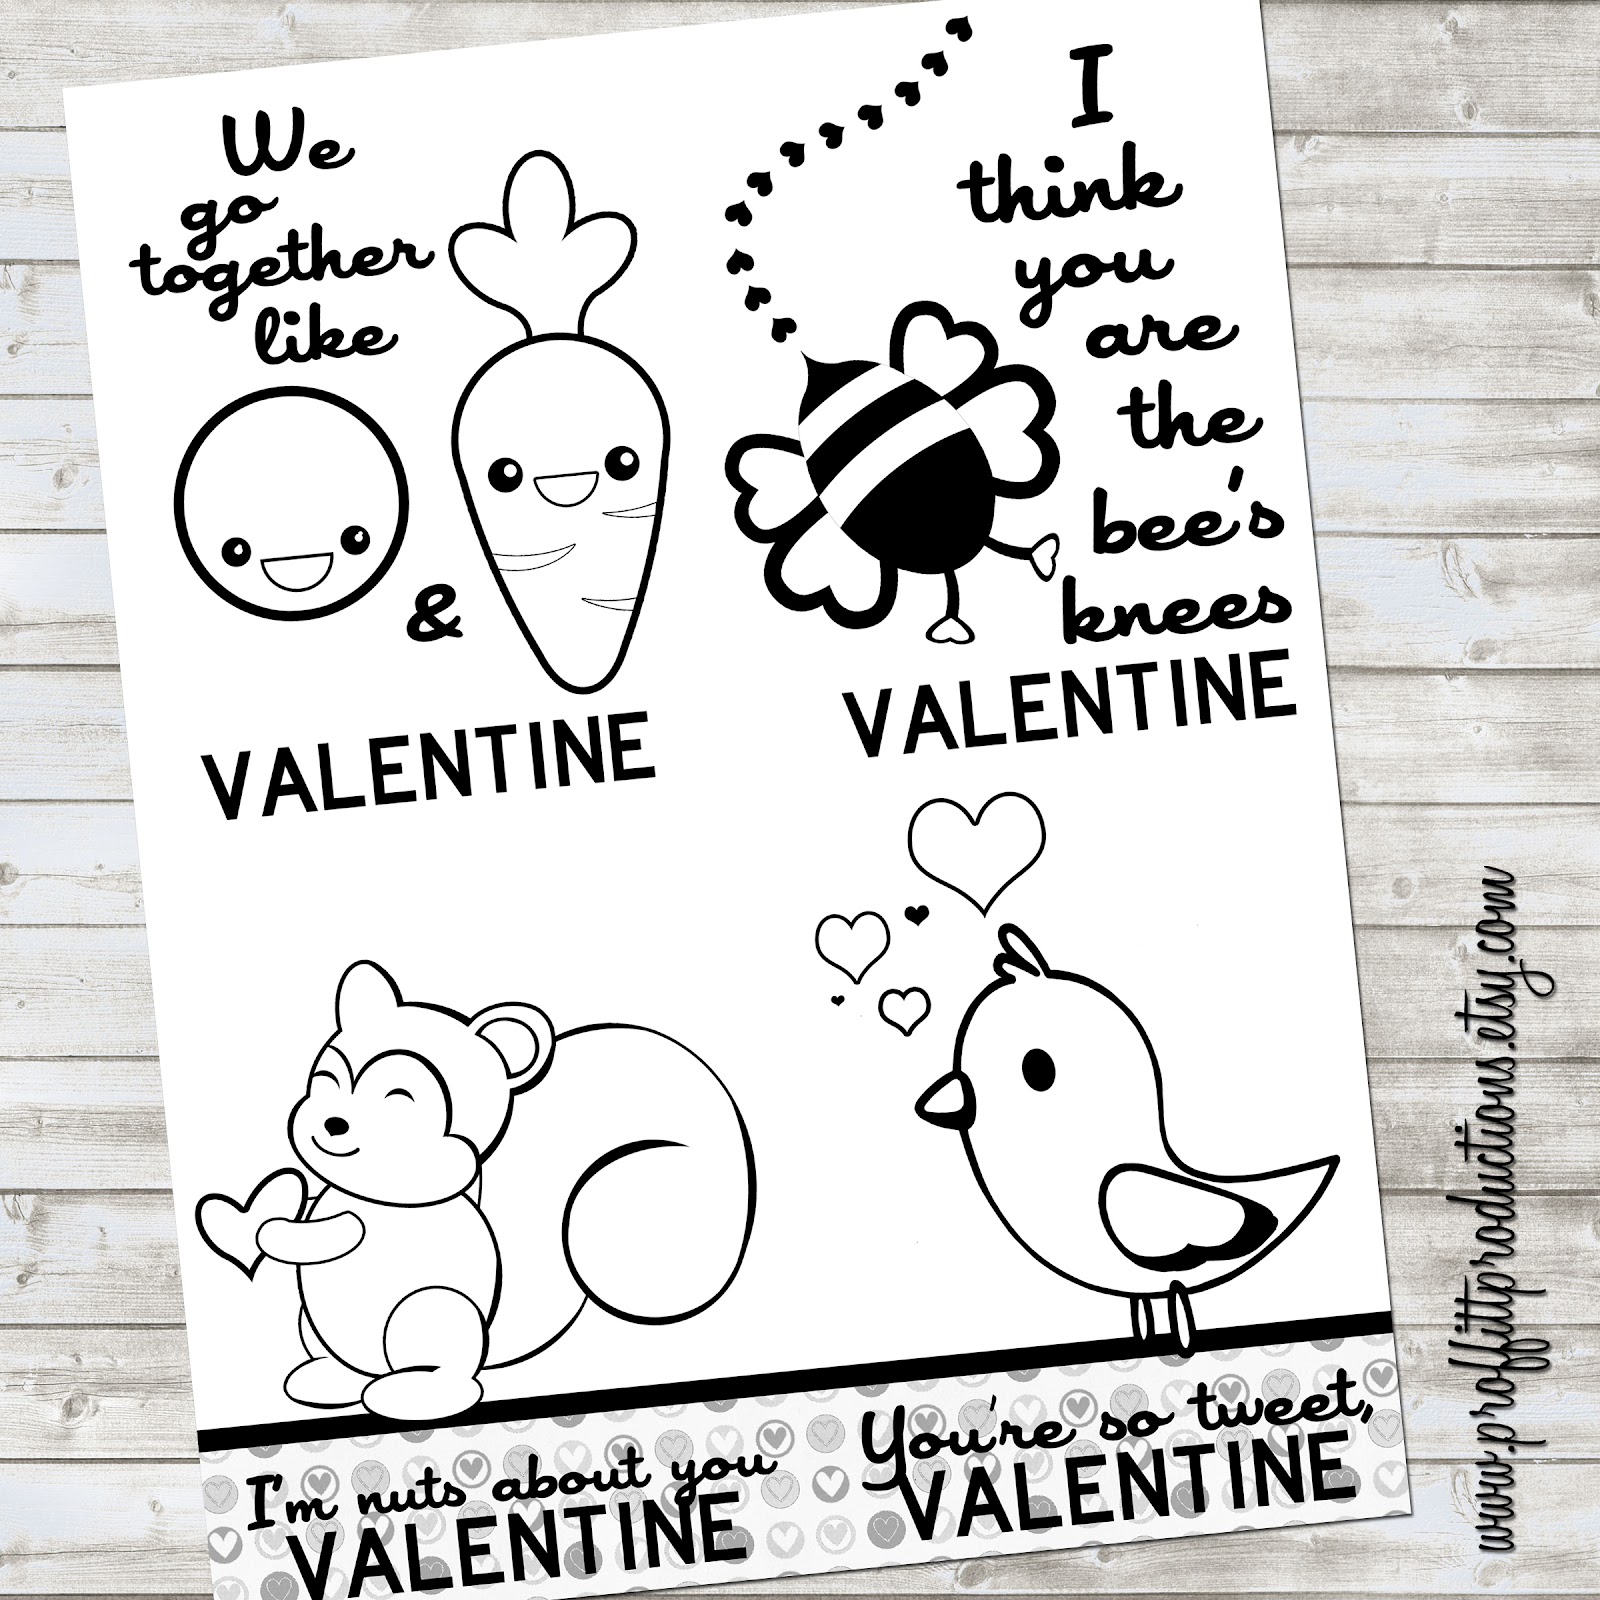 Funny Pictures Gallery: Valentines day sayings for kids, valentines day sayings1600 x 1600